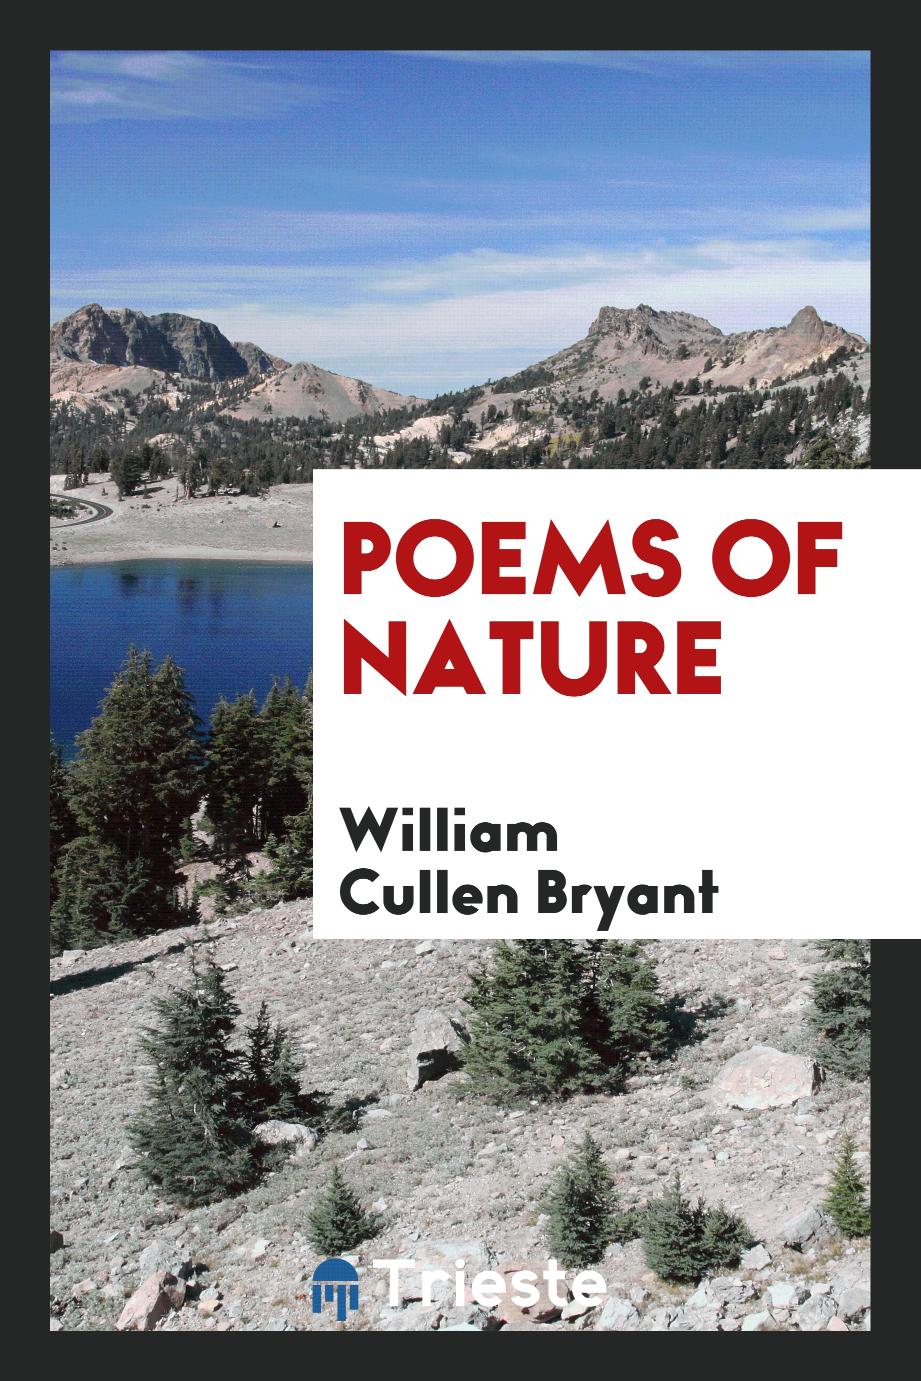 Poems of nature